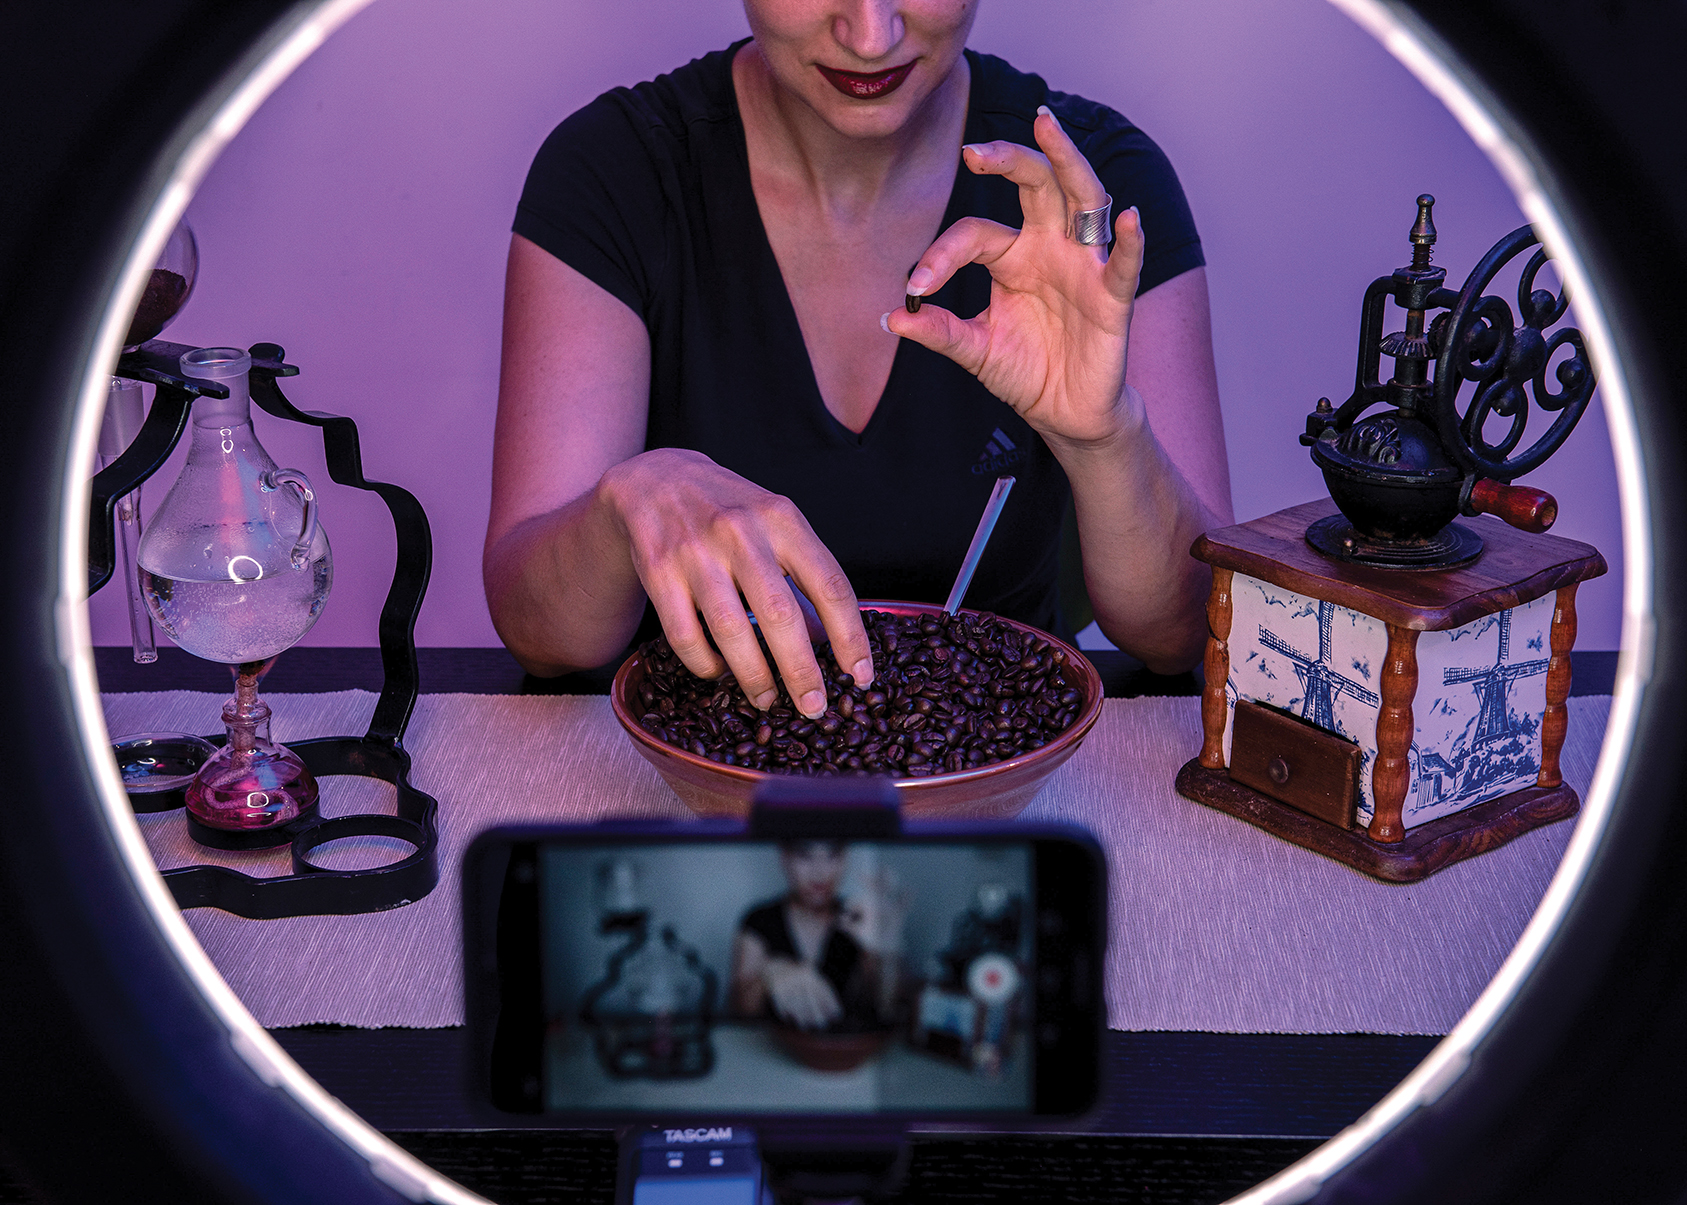 An ASMR artist records a video using an old coffee grinder and beans to make soft sounds.